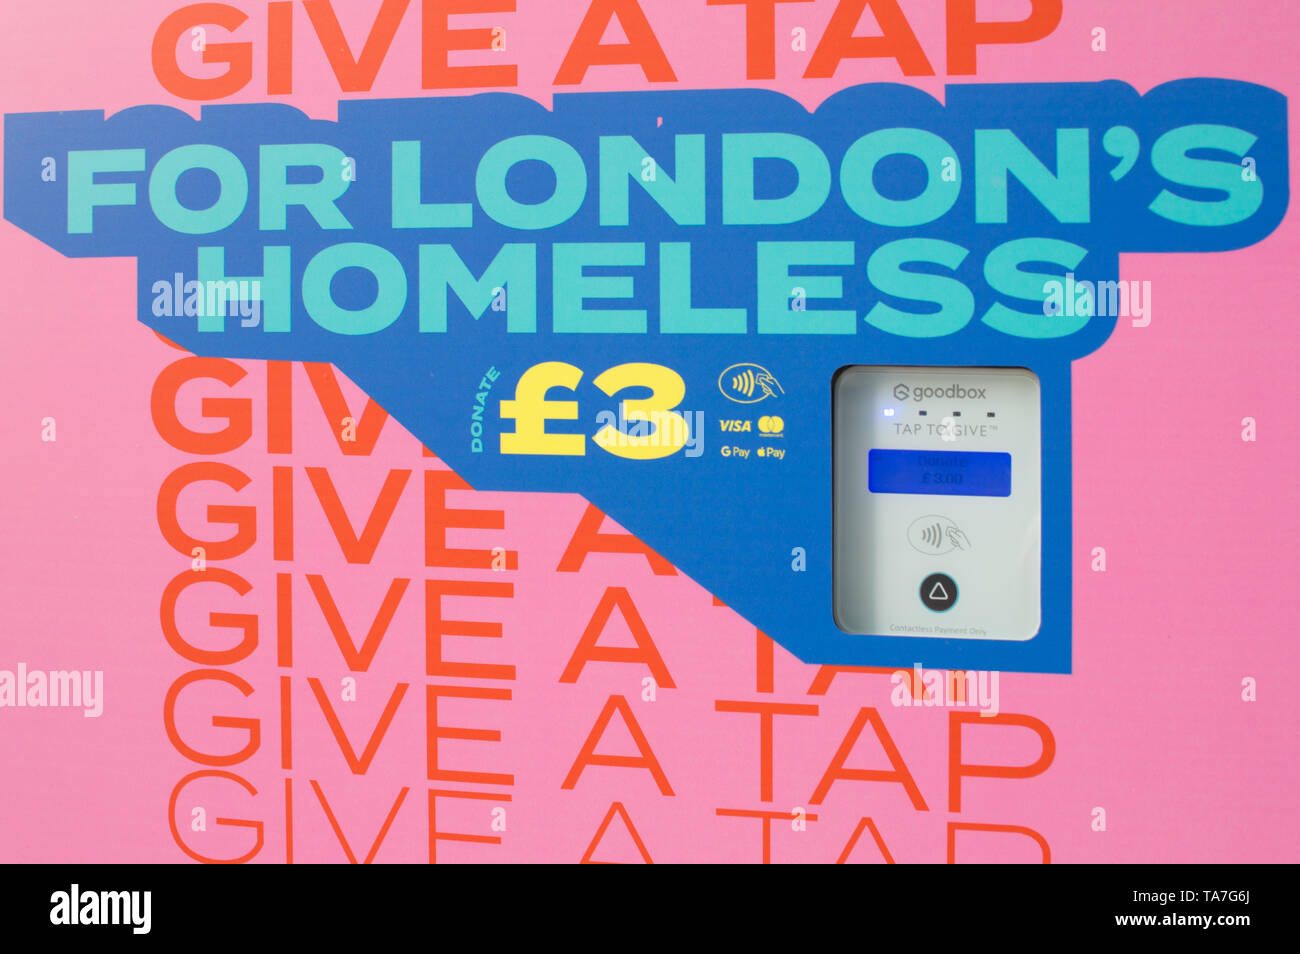 TAP London initiative to give to homeless charity with contactless payment Stock Photo